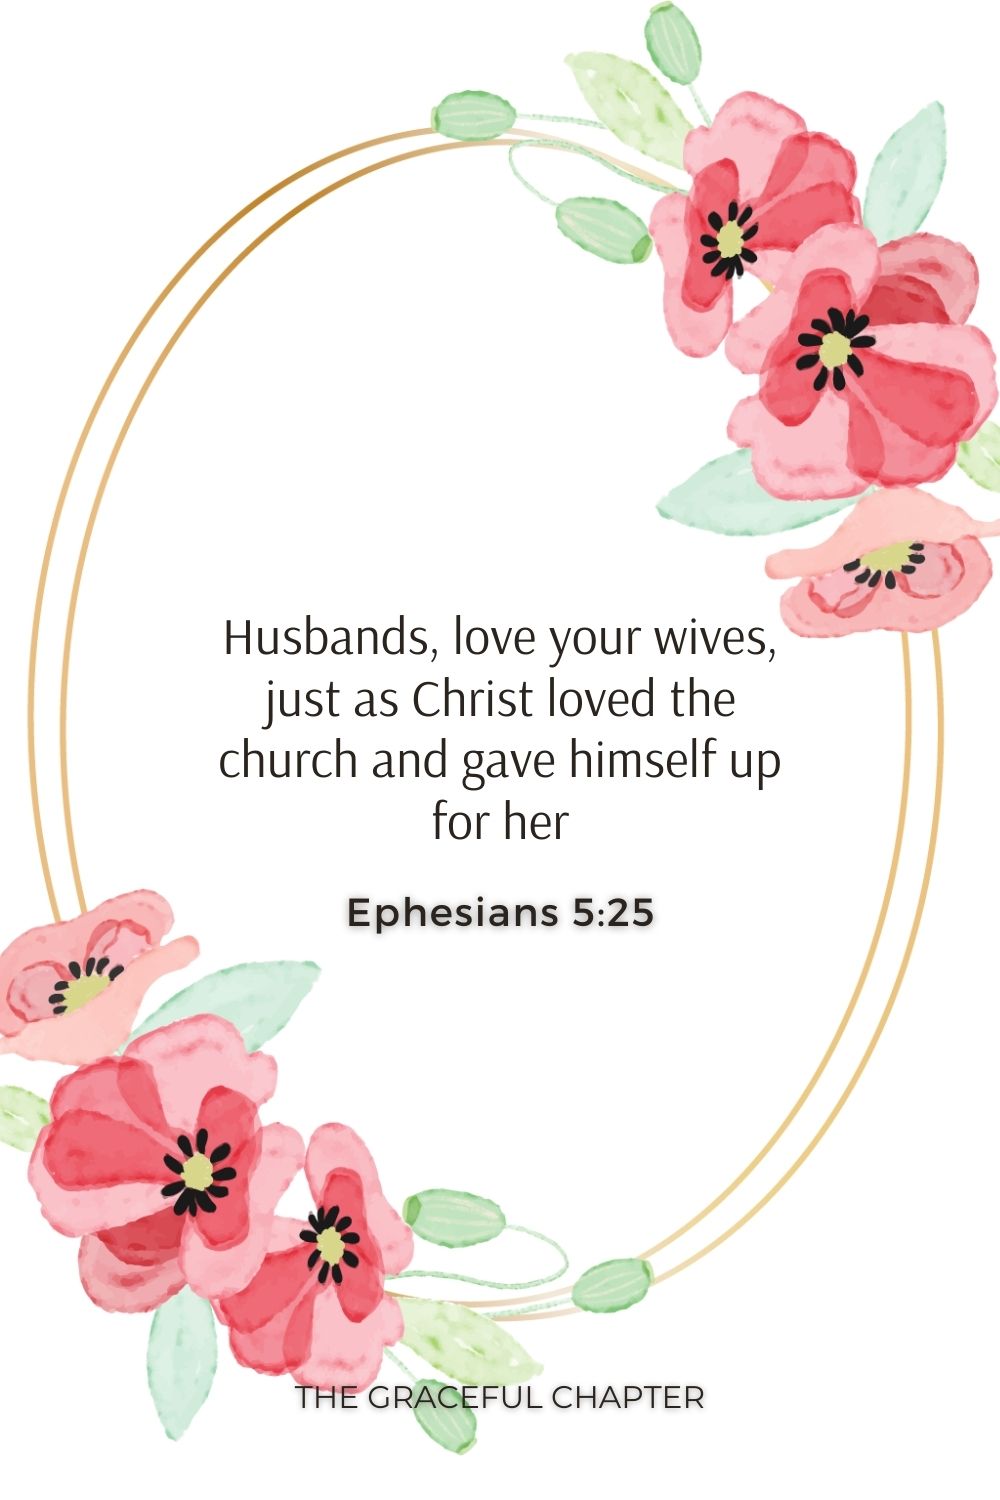 Husbands, love your wives, just as Christ loved the church and gave himself up for herHusbands, love your wives, just as Christ loved the church and gave himself up for her Ephesians 5:25